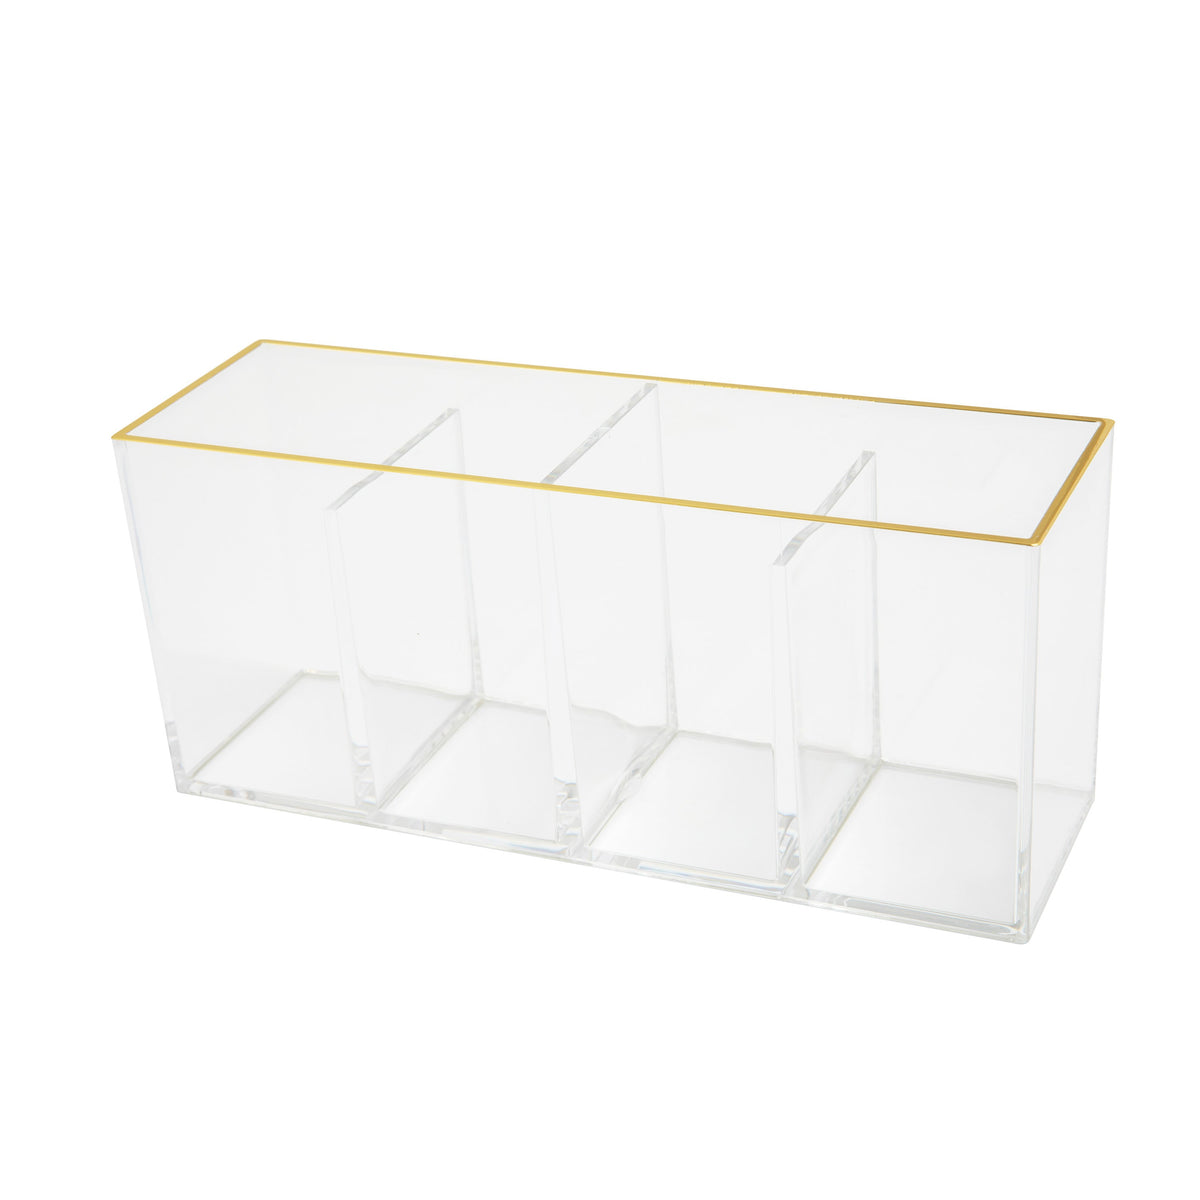 Plastic 4 Compartment Desktop Pen Holder and Organizer with Gold Trim